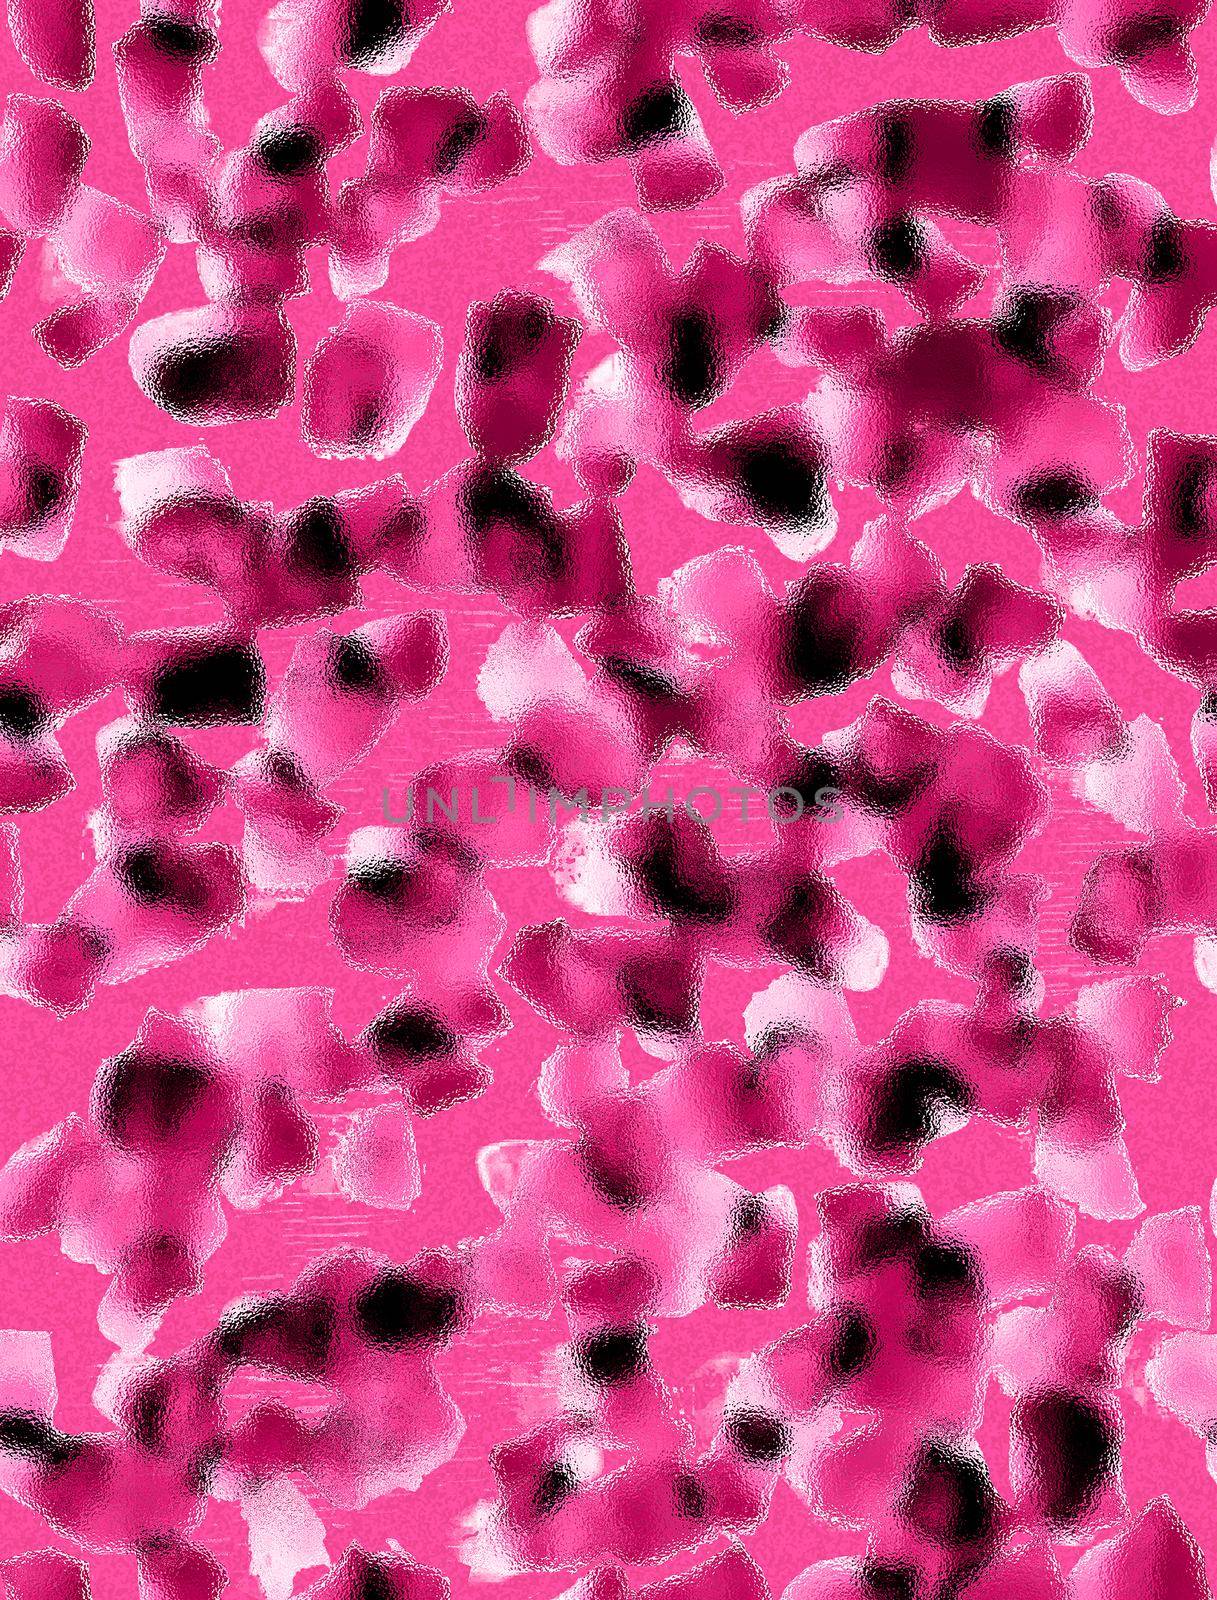 Seamless background pattern with pink tie dye spots and stains painted in watercolor